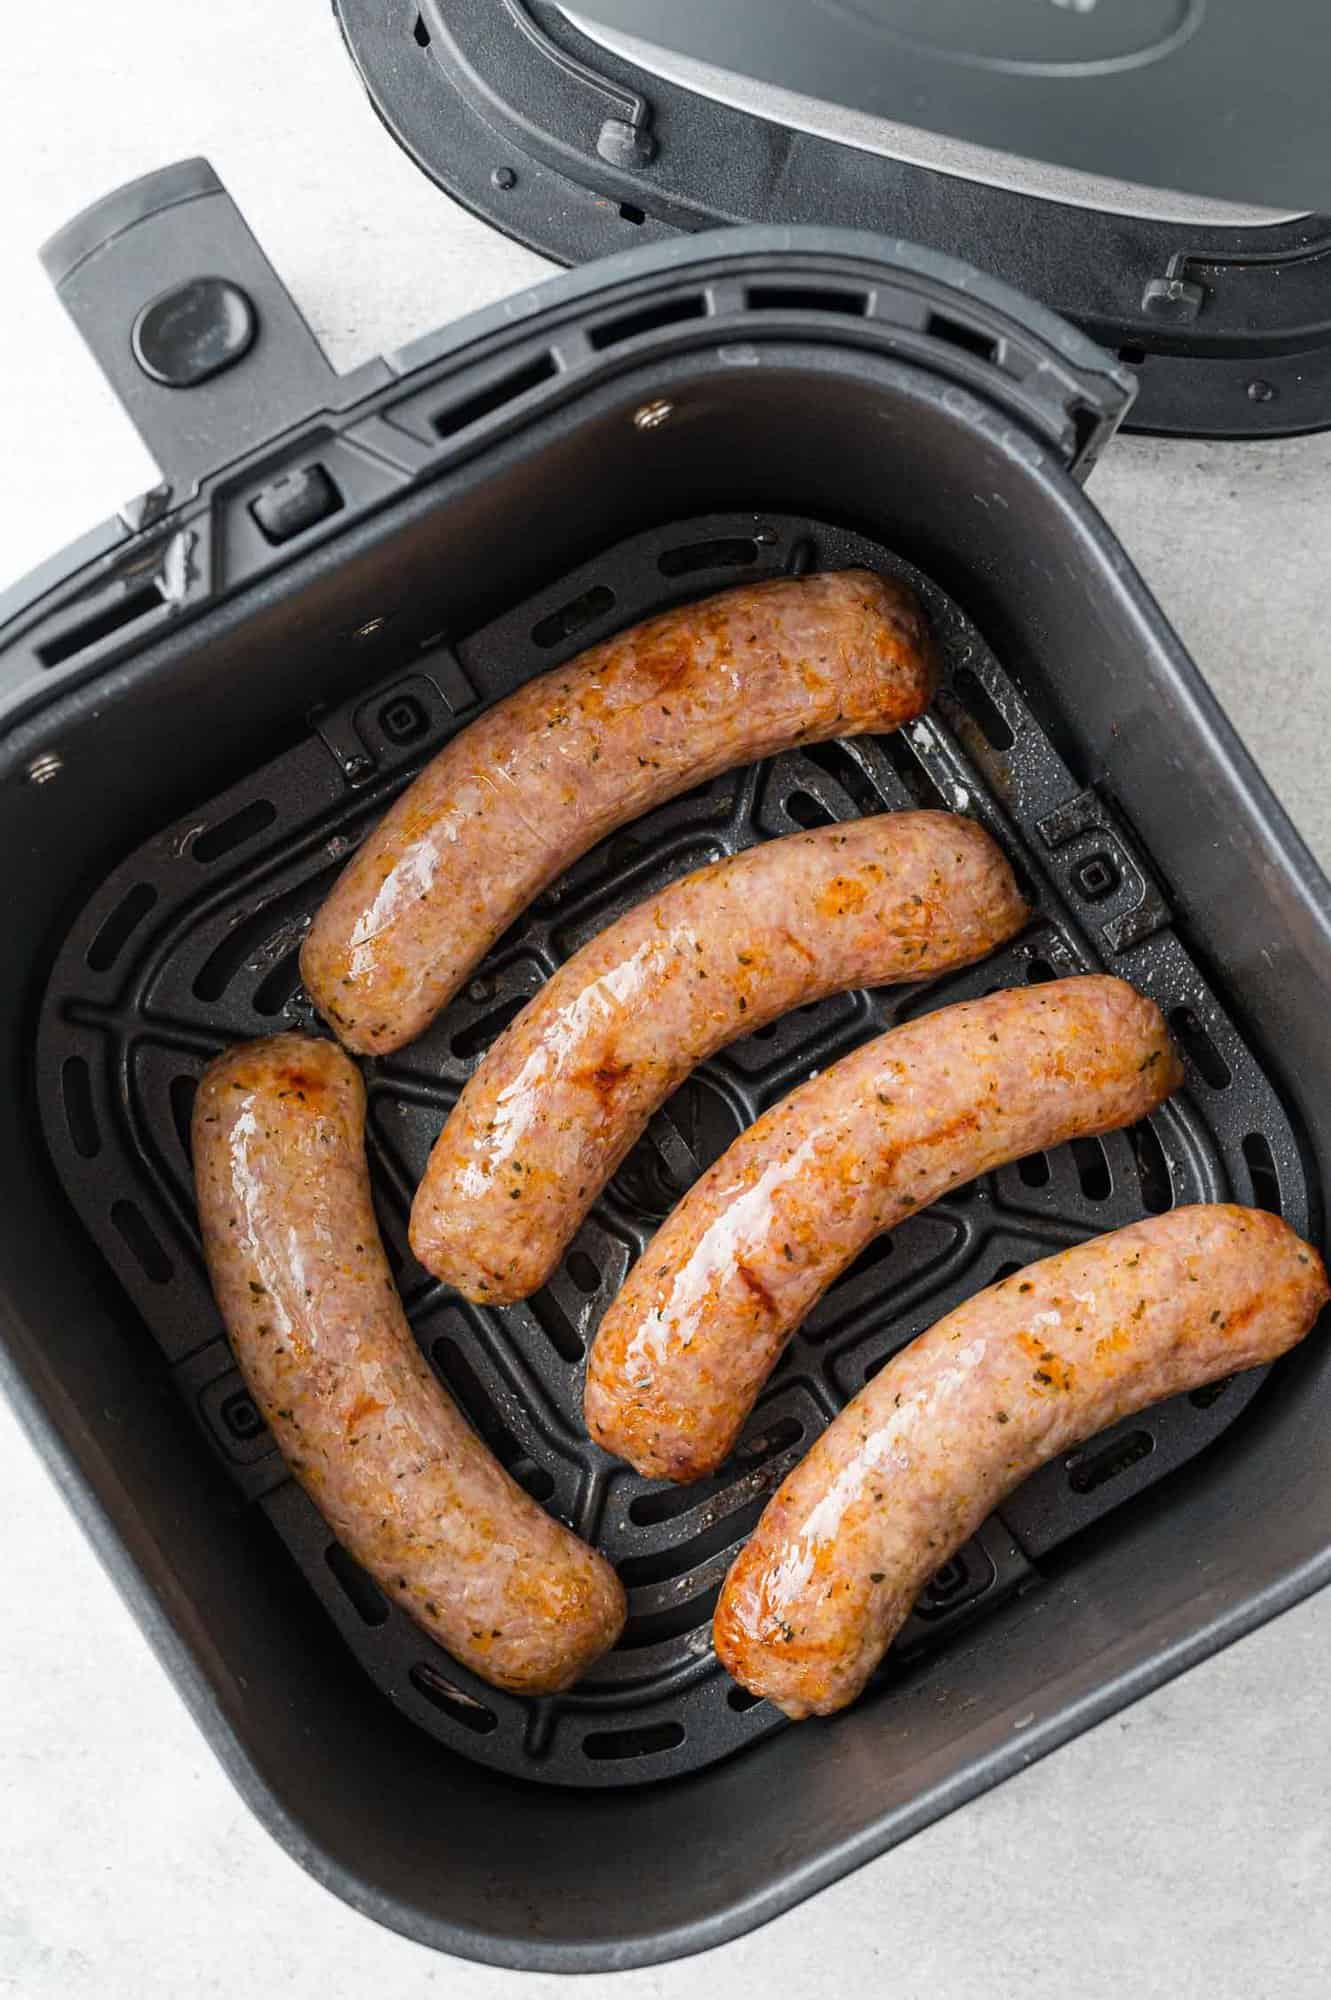 Overhead view of cooked Italian sausage in air fryer basket.